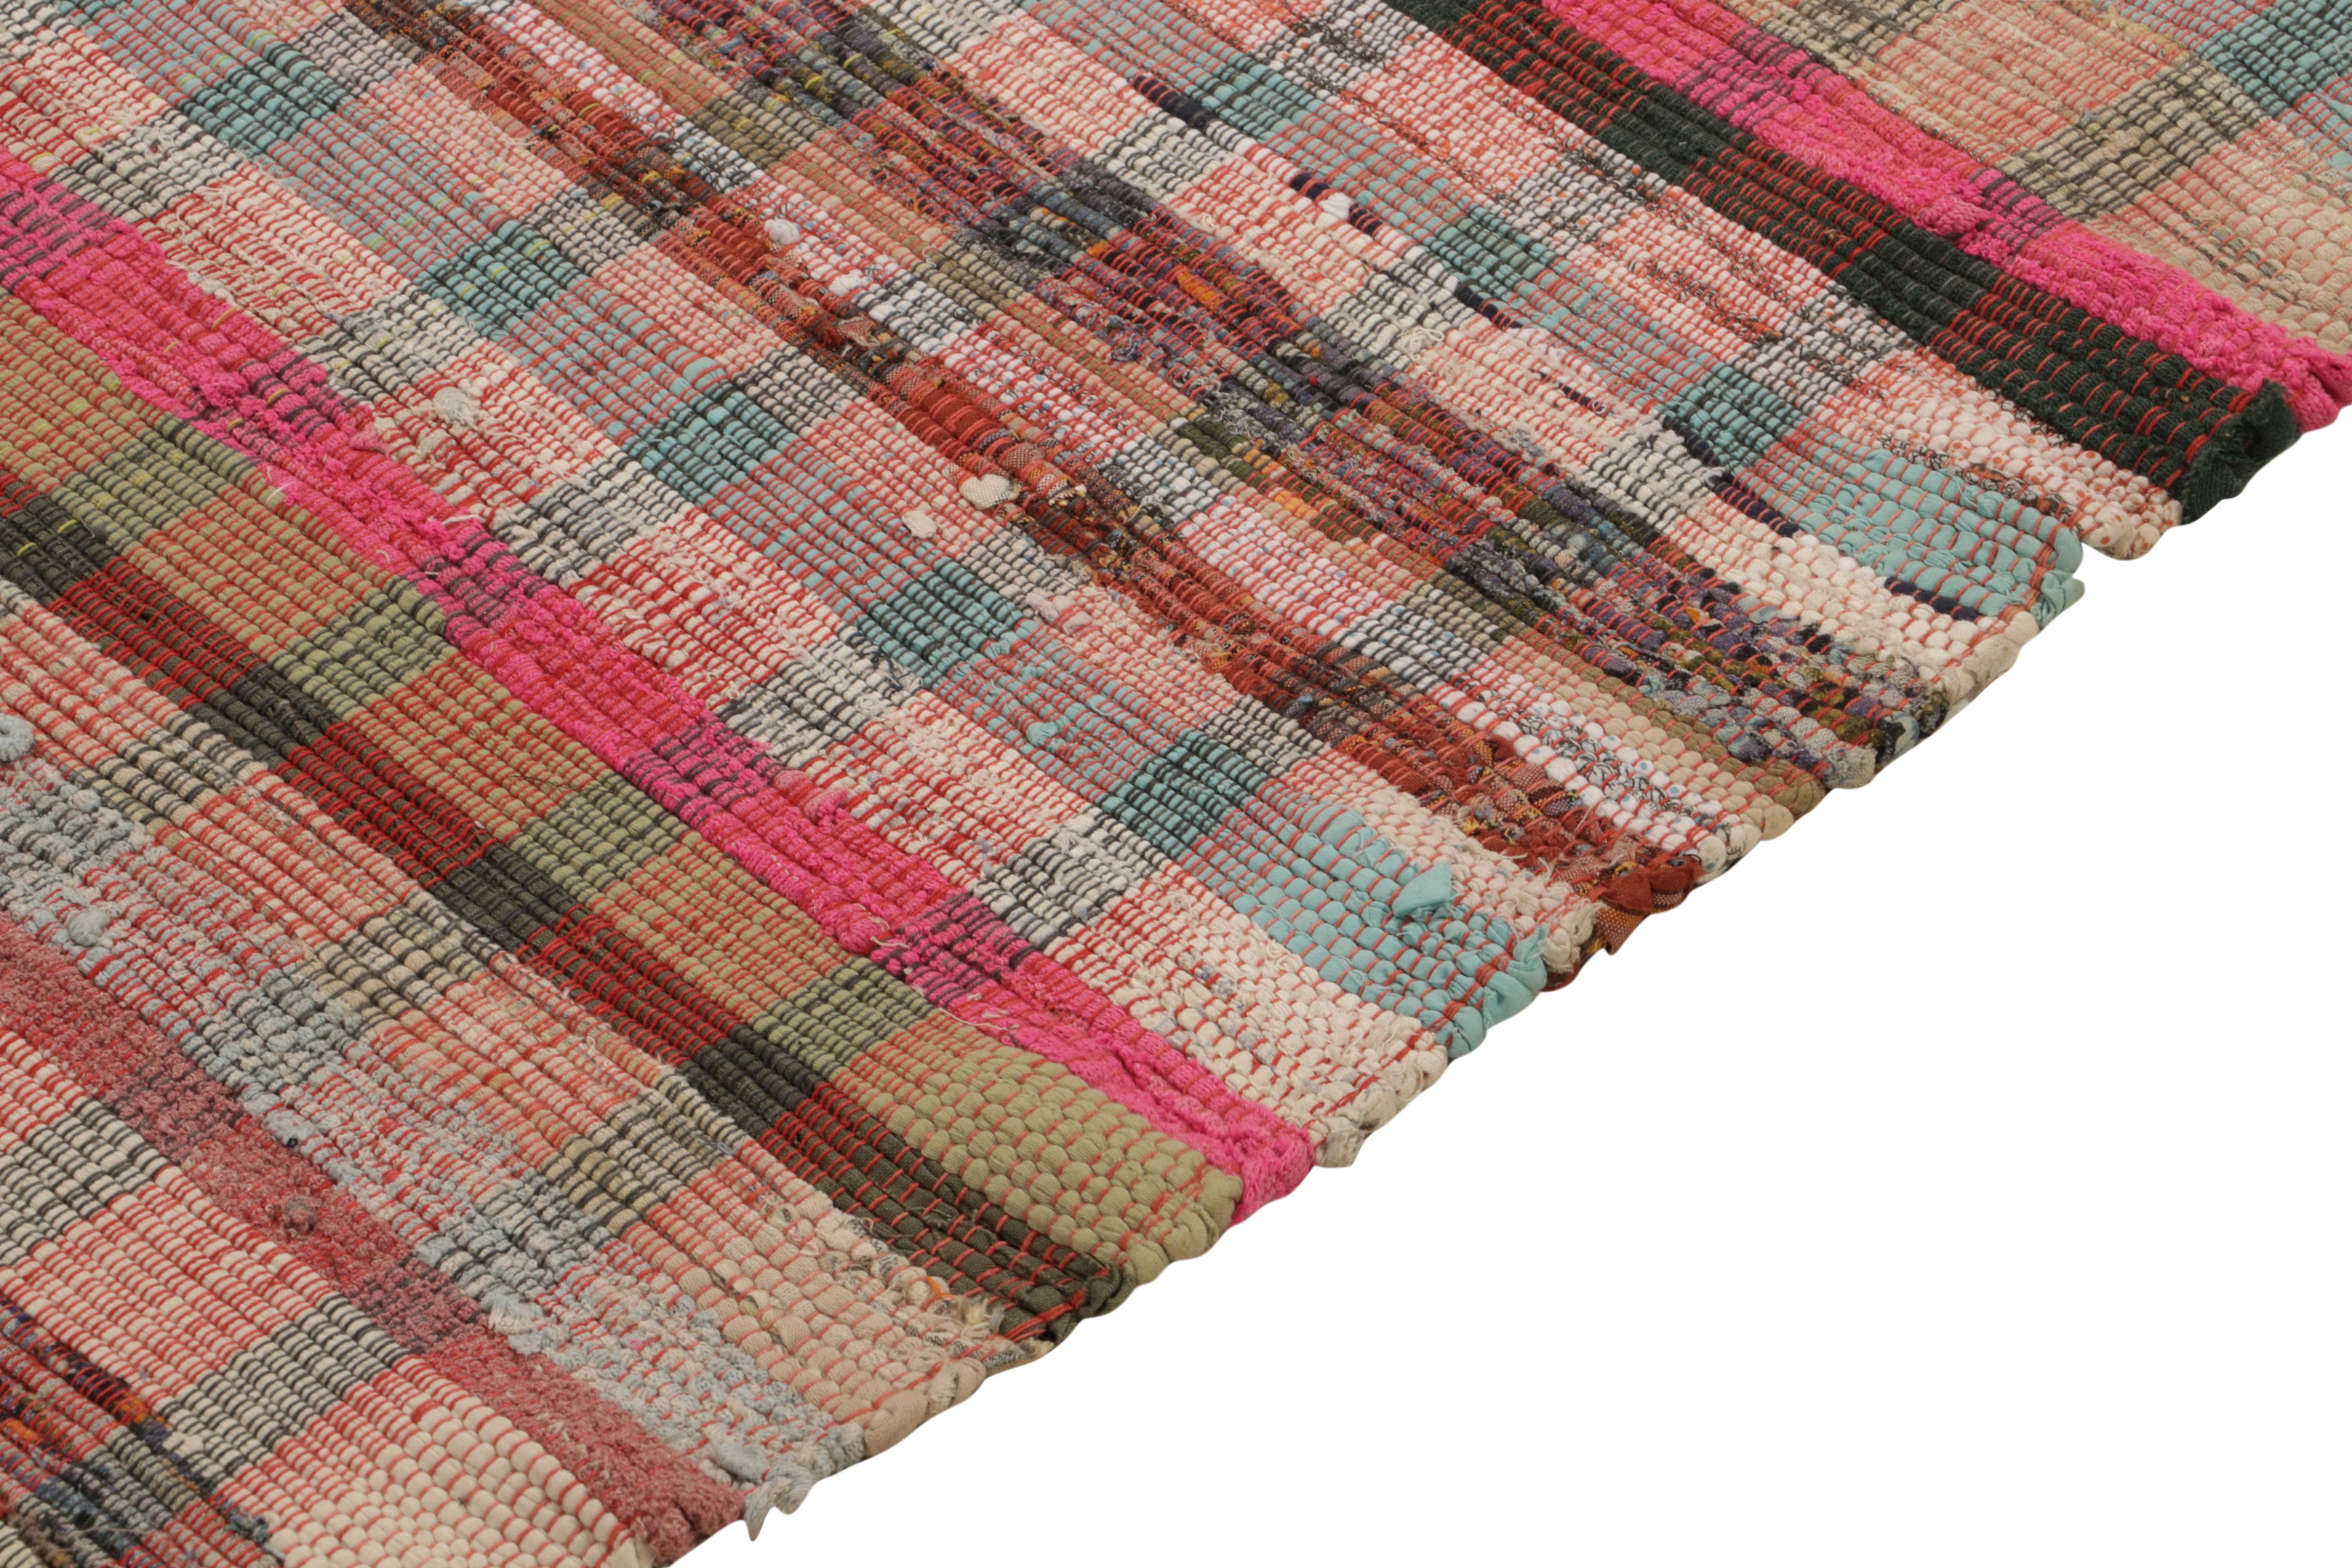 Hand-Knotted Rug & Kilim’s Oversized Flat Weave Runner in Pink & Colorful Plaid Pattern For Sale